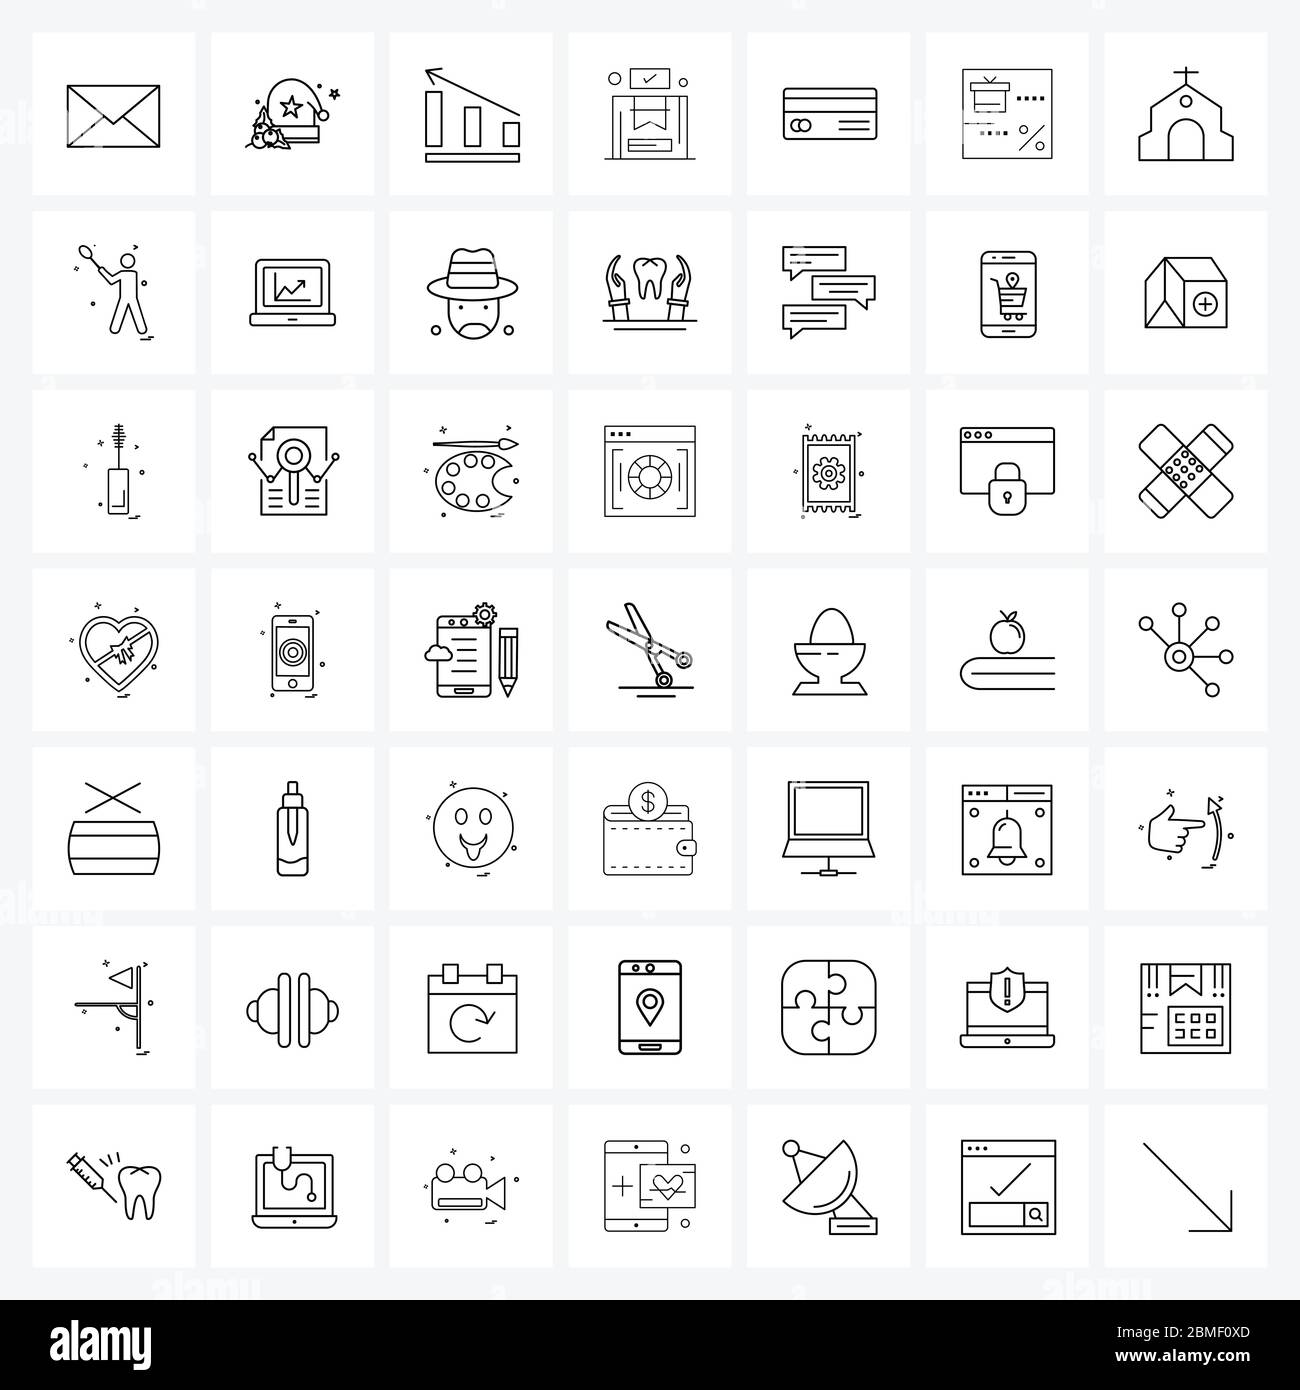 49 Interface Line Icon Set of modern symbols on voucher, card, graph, atm, box Vector Illustration Stock Vector